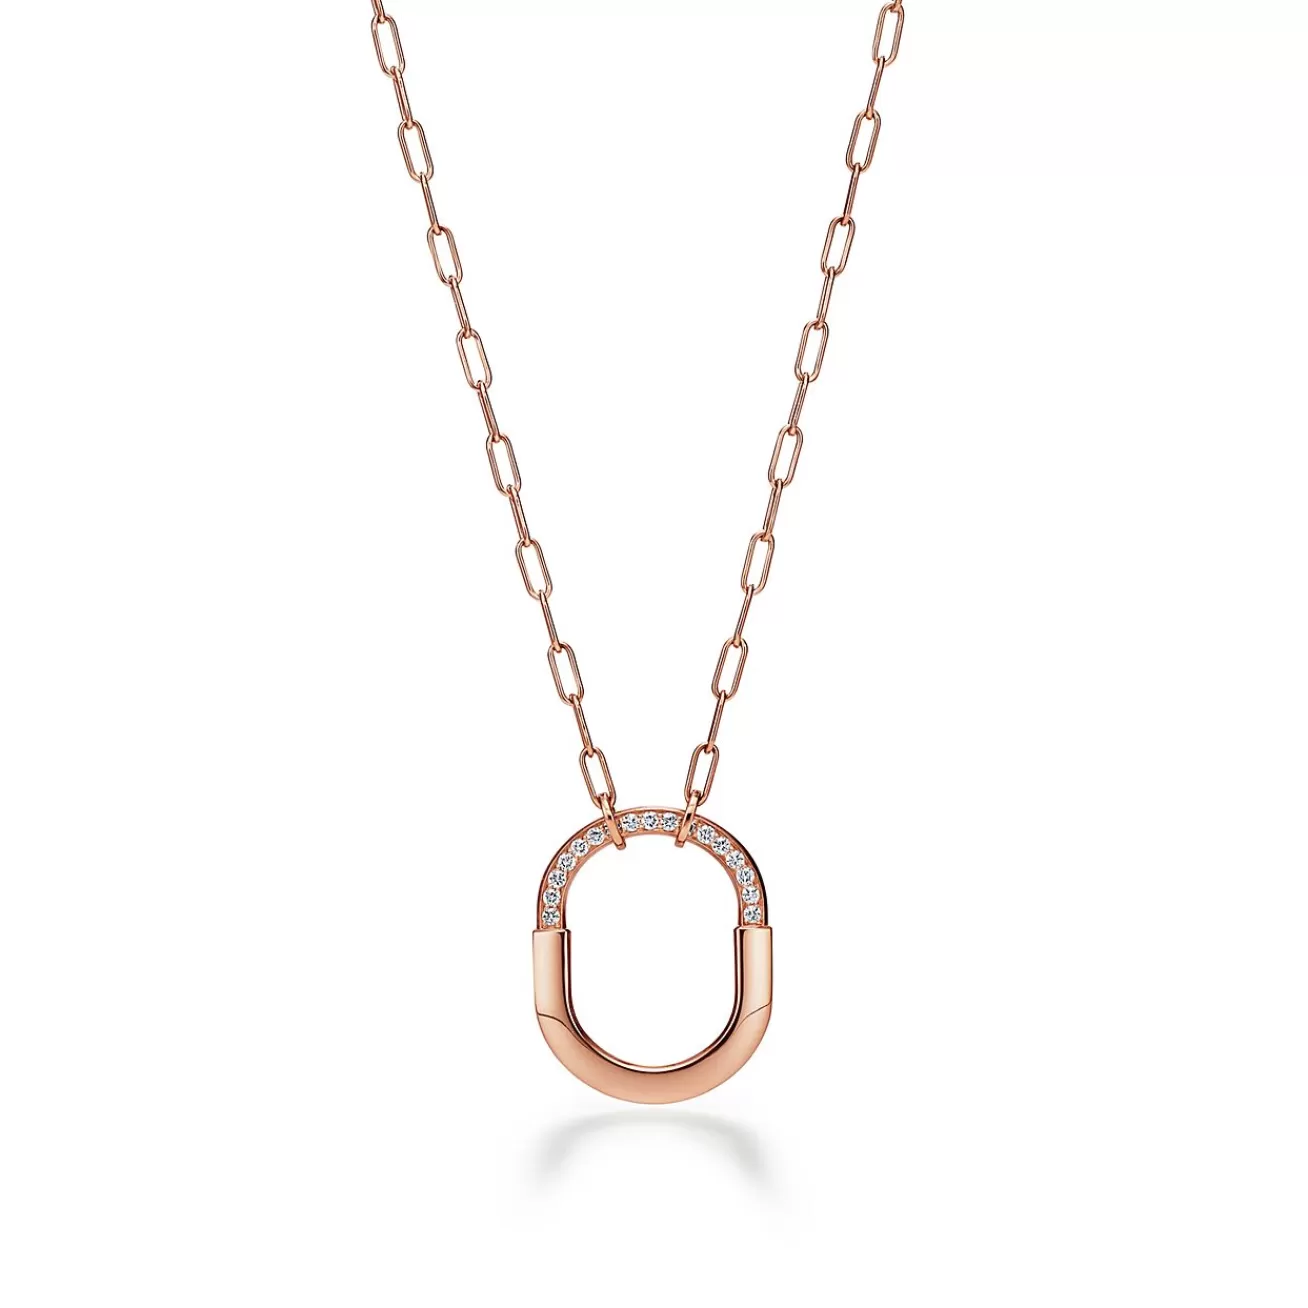 Tiffany & Co. Tiffany Lock Pendant in Rose Gold with Diamonds, Medium | ^ Necklaces & Pendants | Rose Gold Jewelry